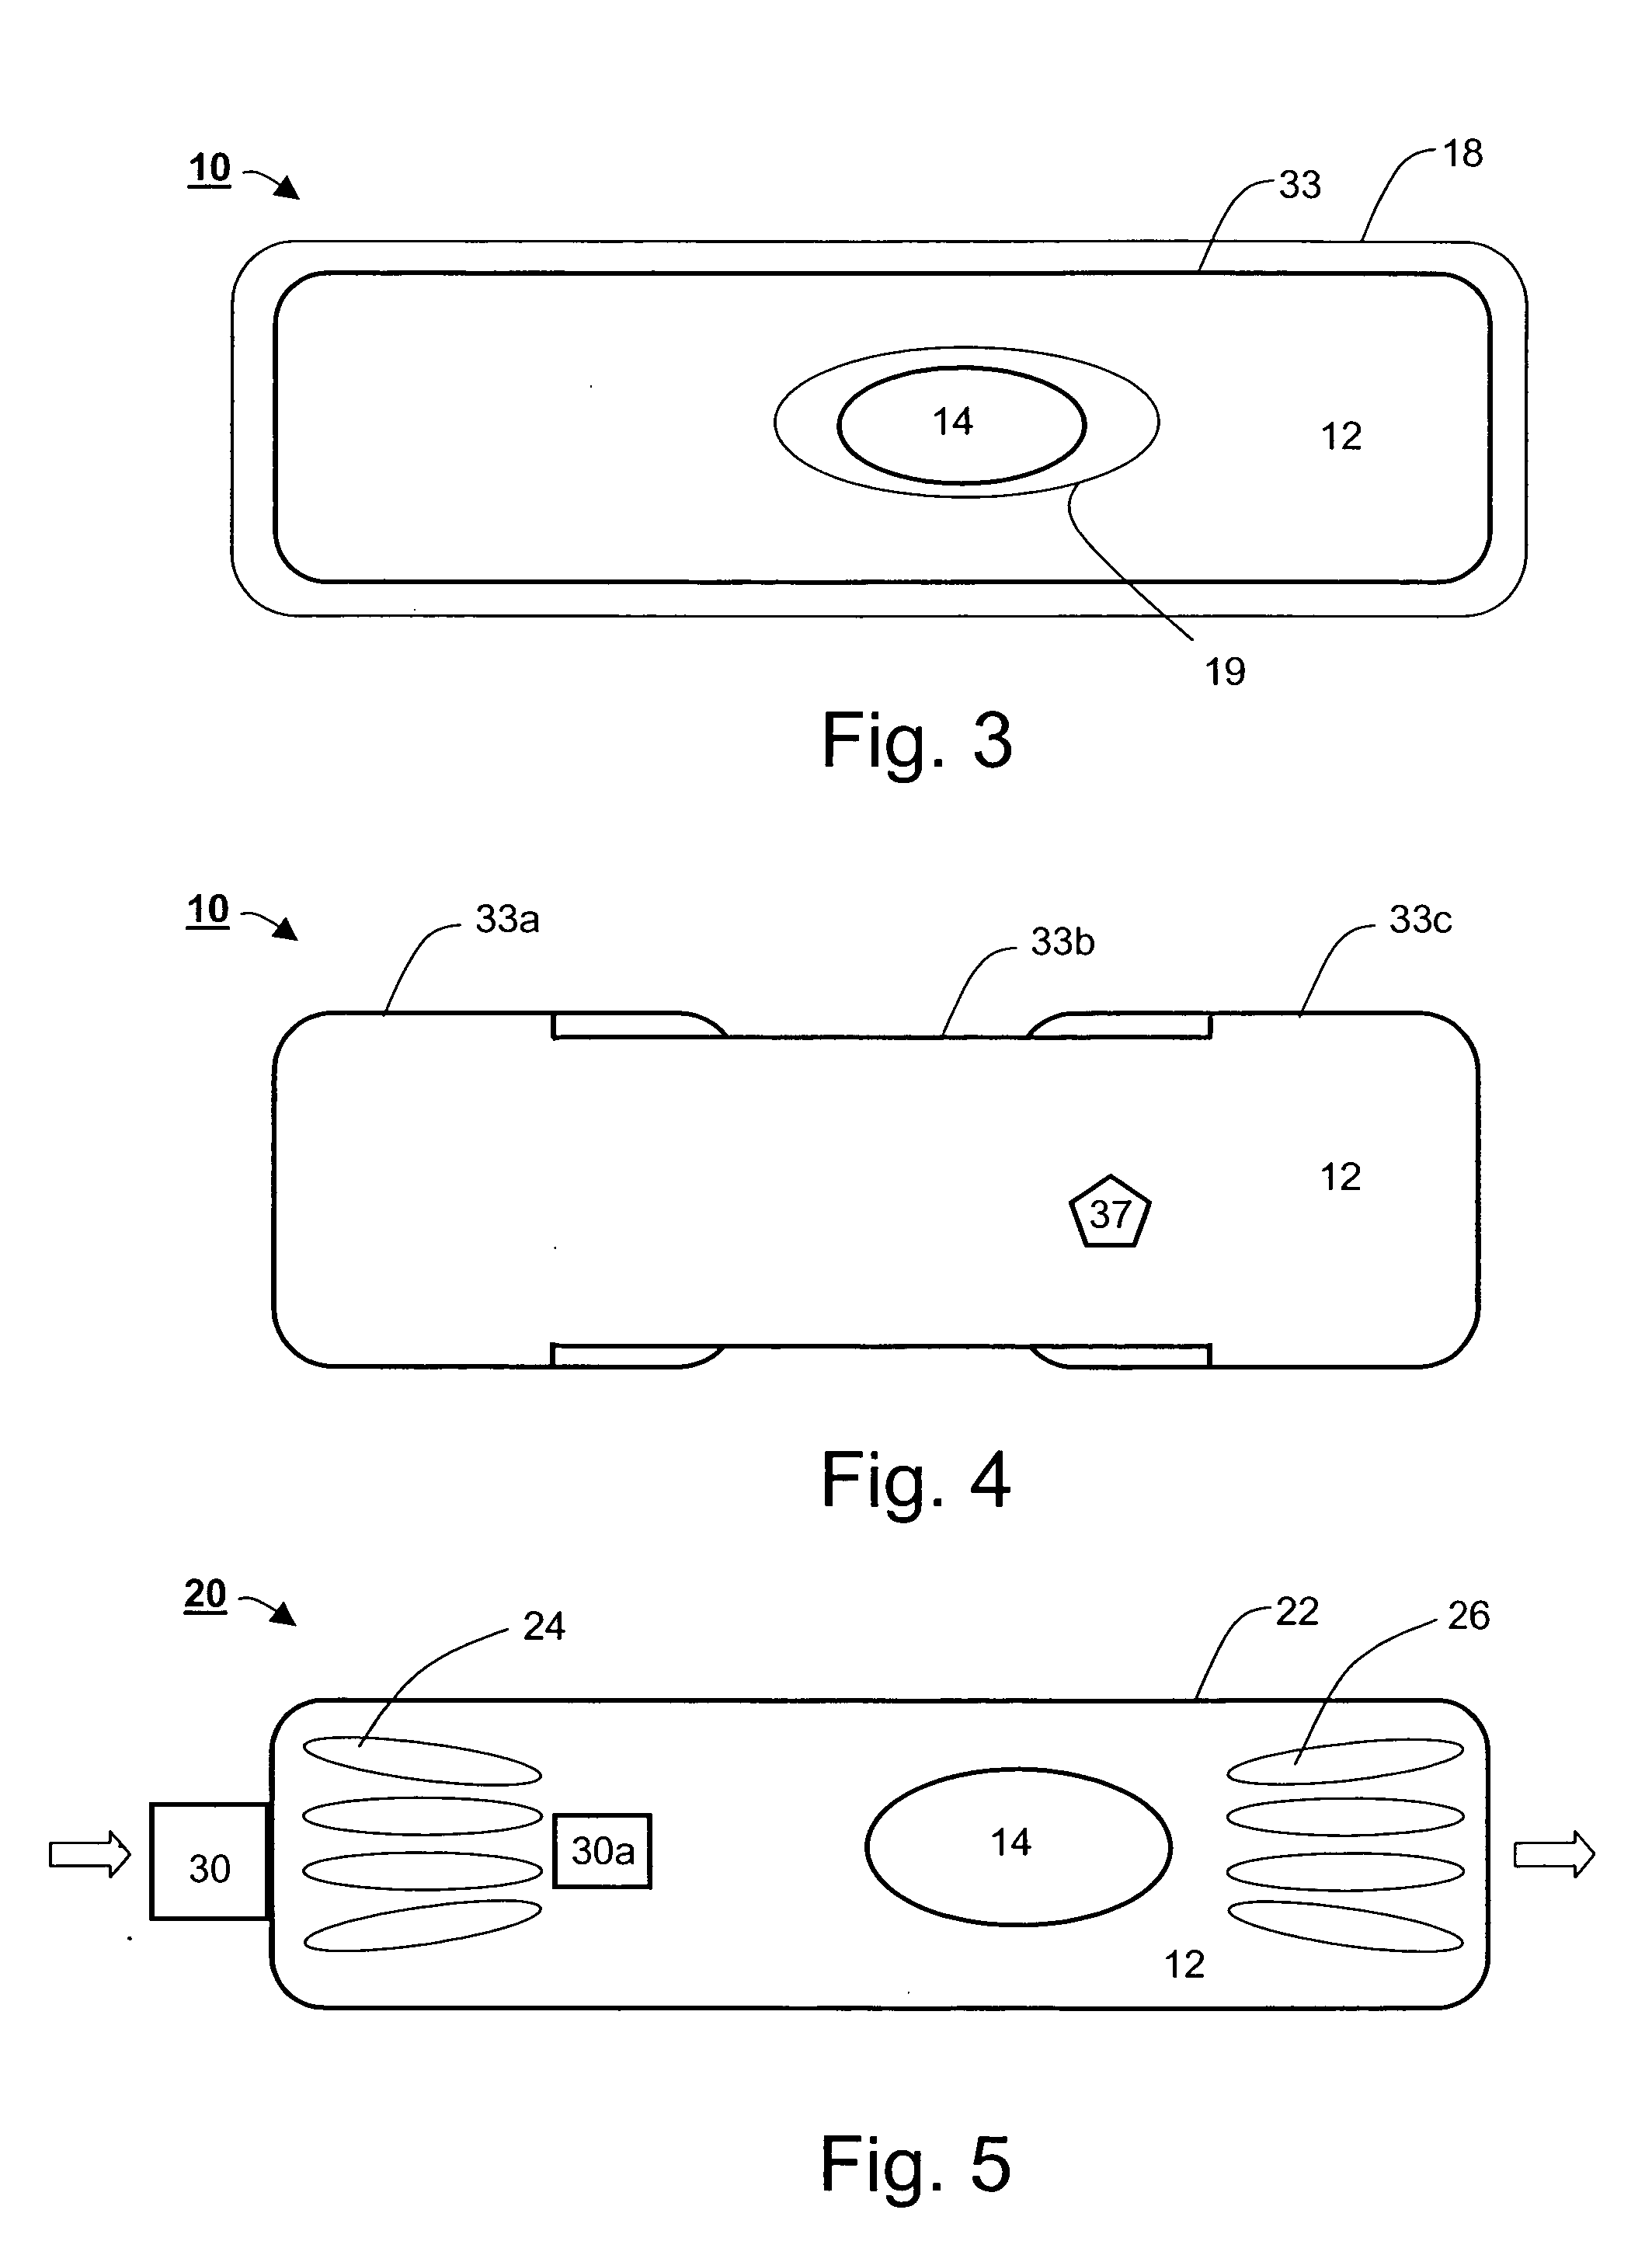 Ingestible gastrointestinal device